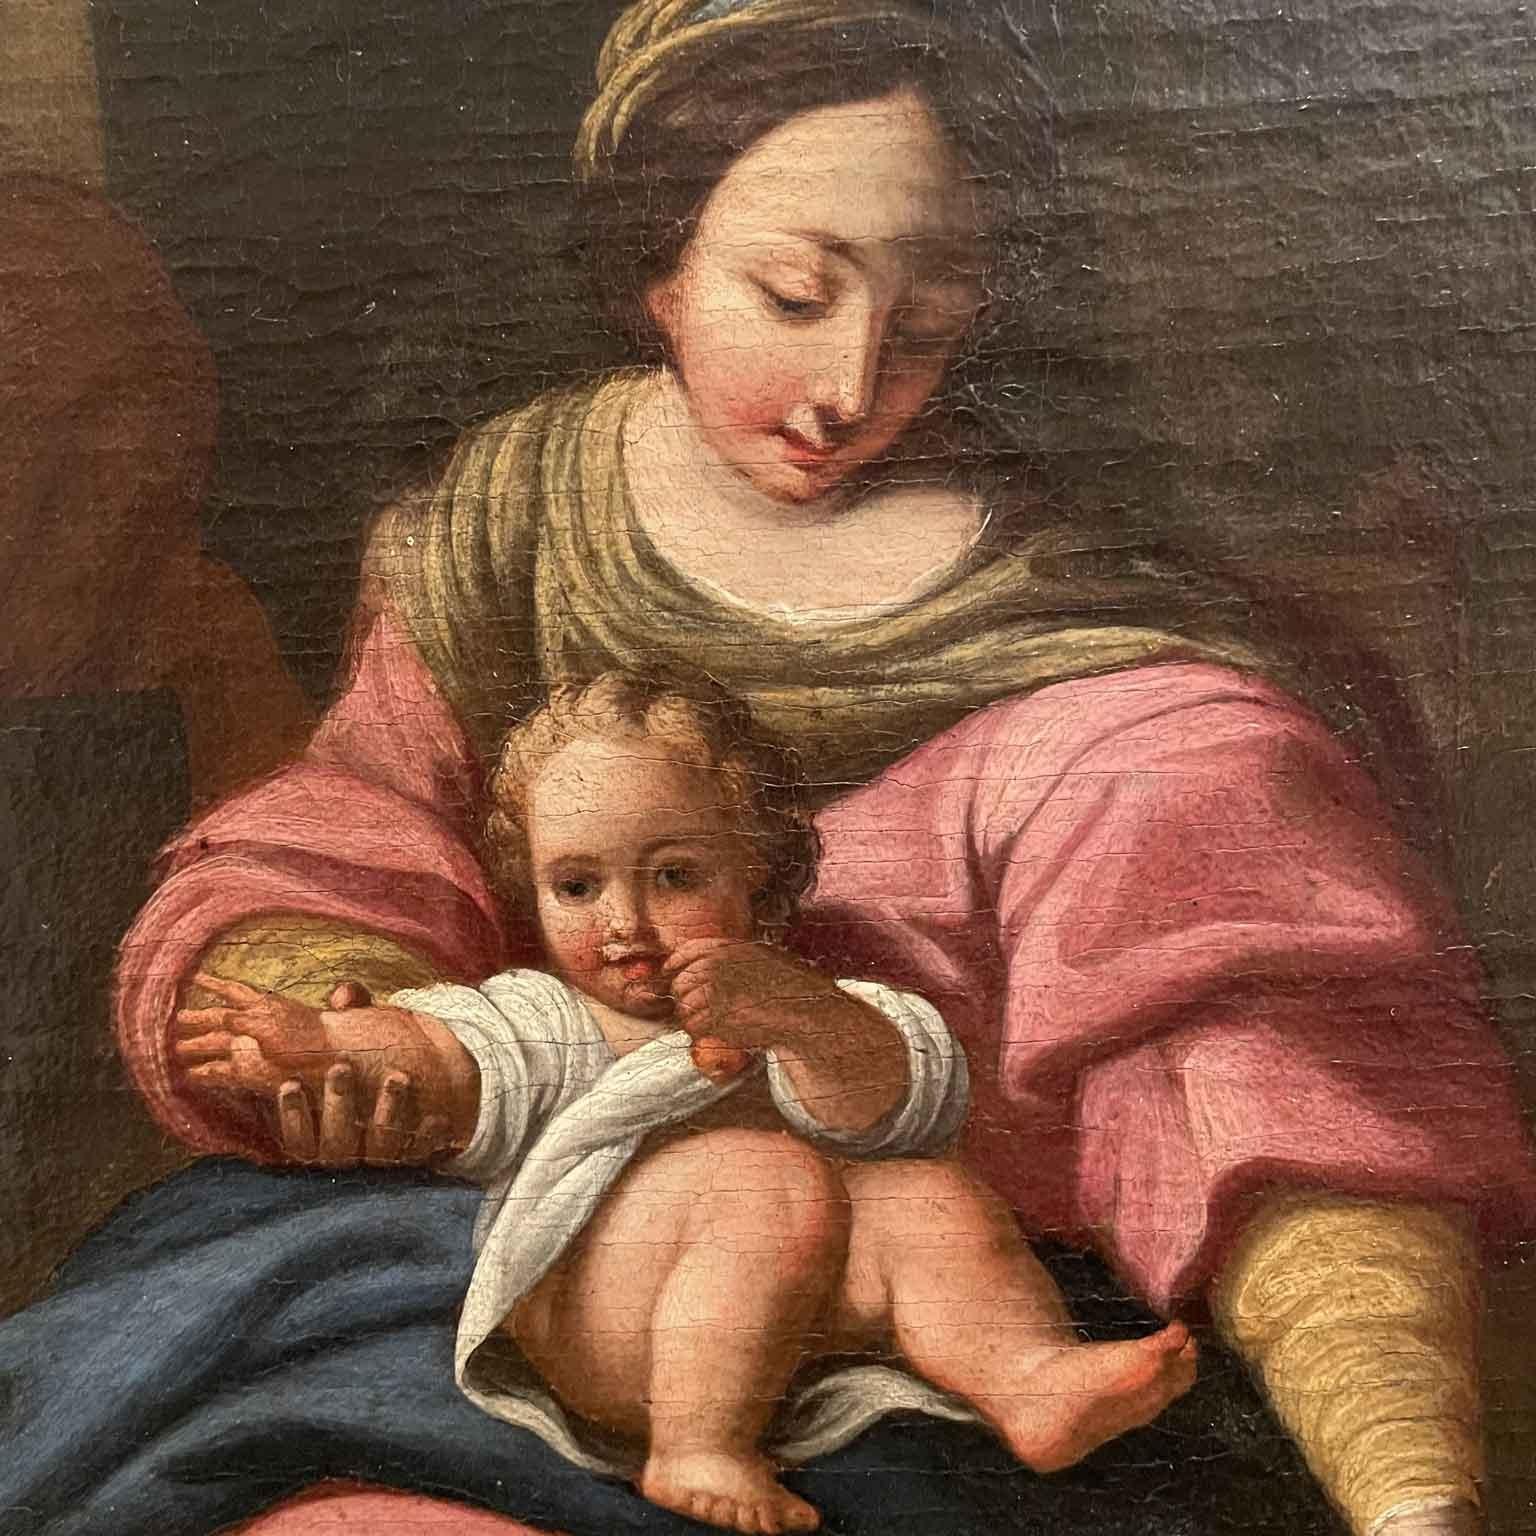 Madonna and Child with St. Joseph oil painting on canvas from the early 19th century depicting the Virgin in an interior by the side of a green curtain intent on taking textiles from a basket while holding the Child covered in a white robe on her